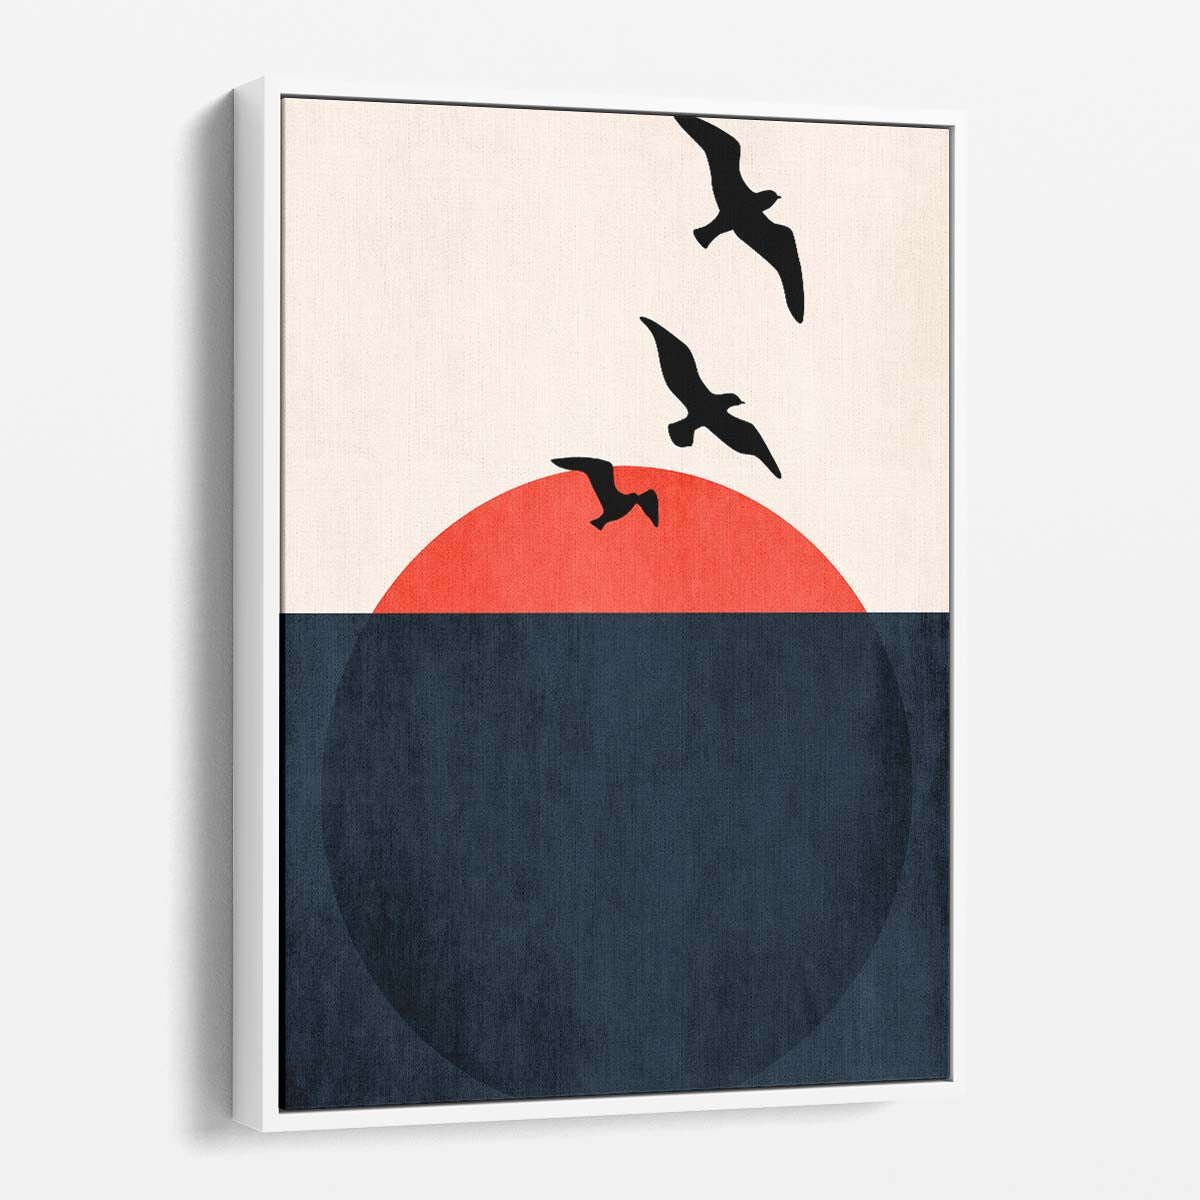 Kubistika's Bright Sunset Illustration of Seagulls in Flight by Luxuriance Designs, made in USA